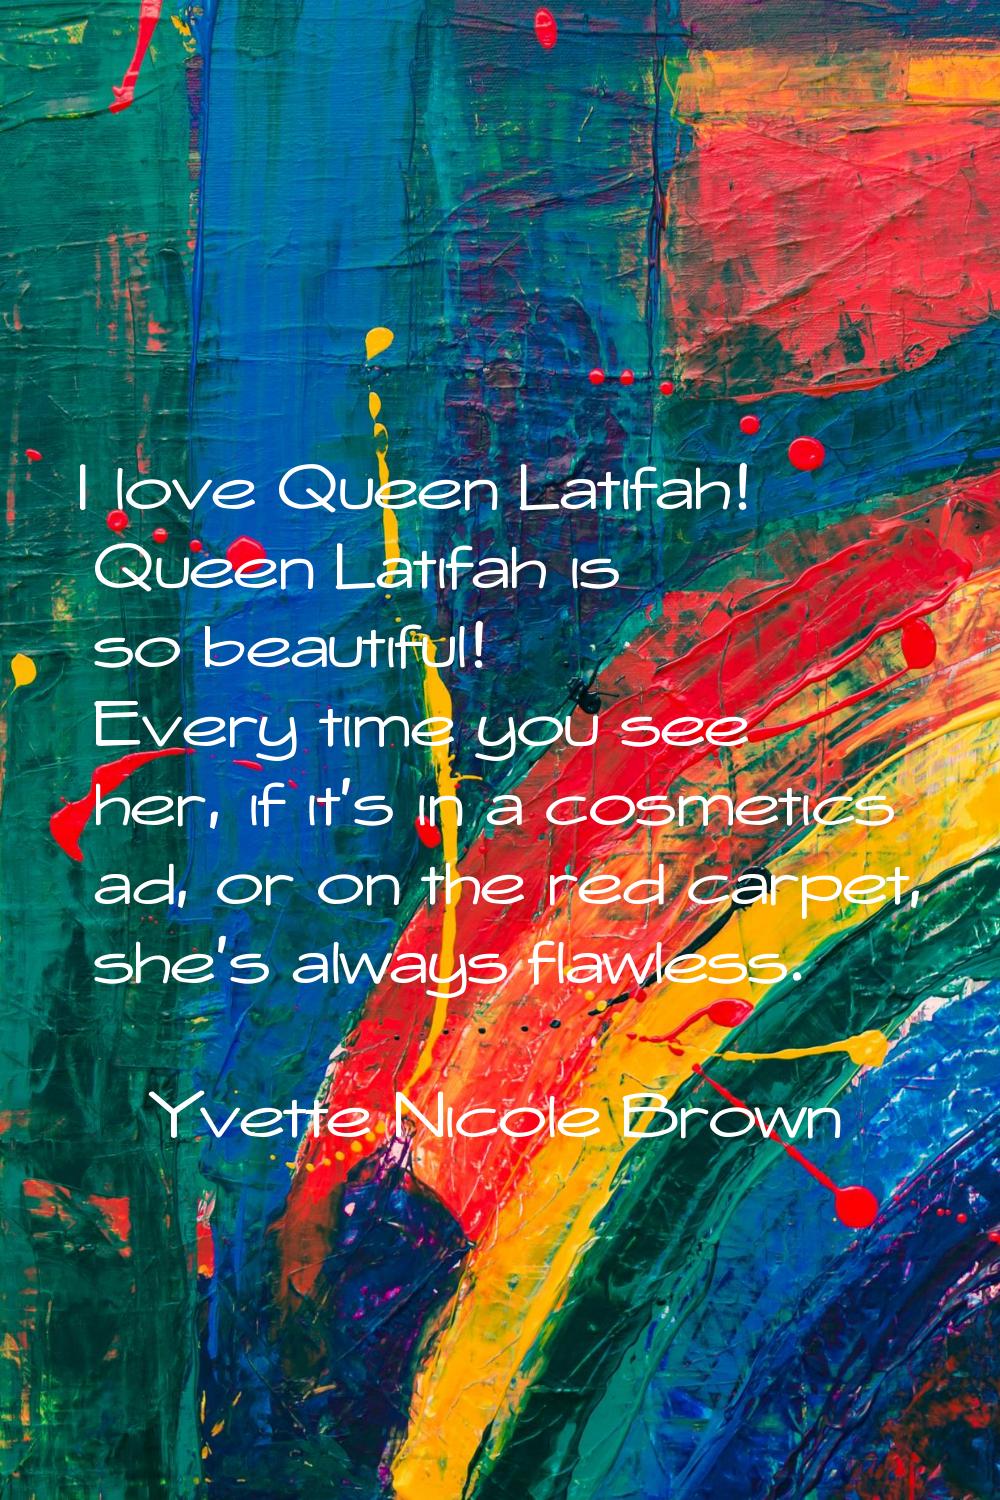 I love Queen Latifah! Queen Latifah is so beautiful! Every time you see her, if it's in a cosmetics